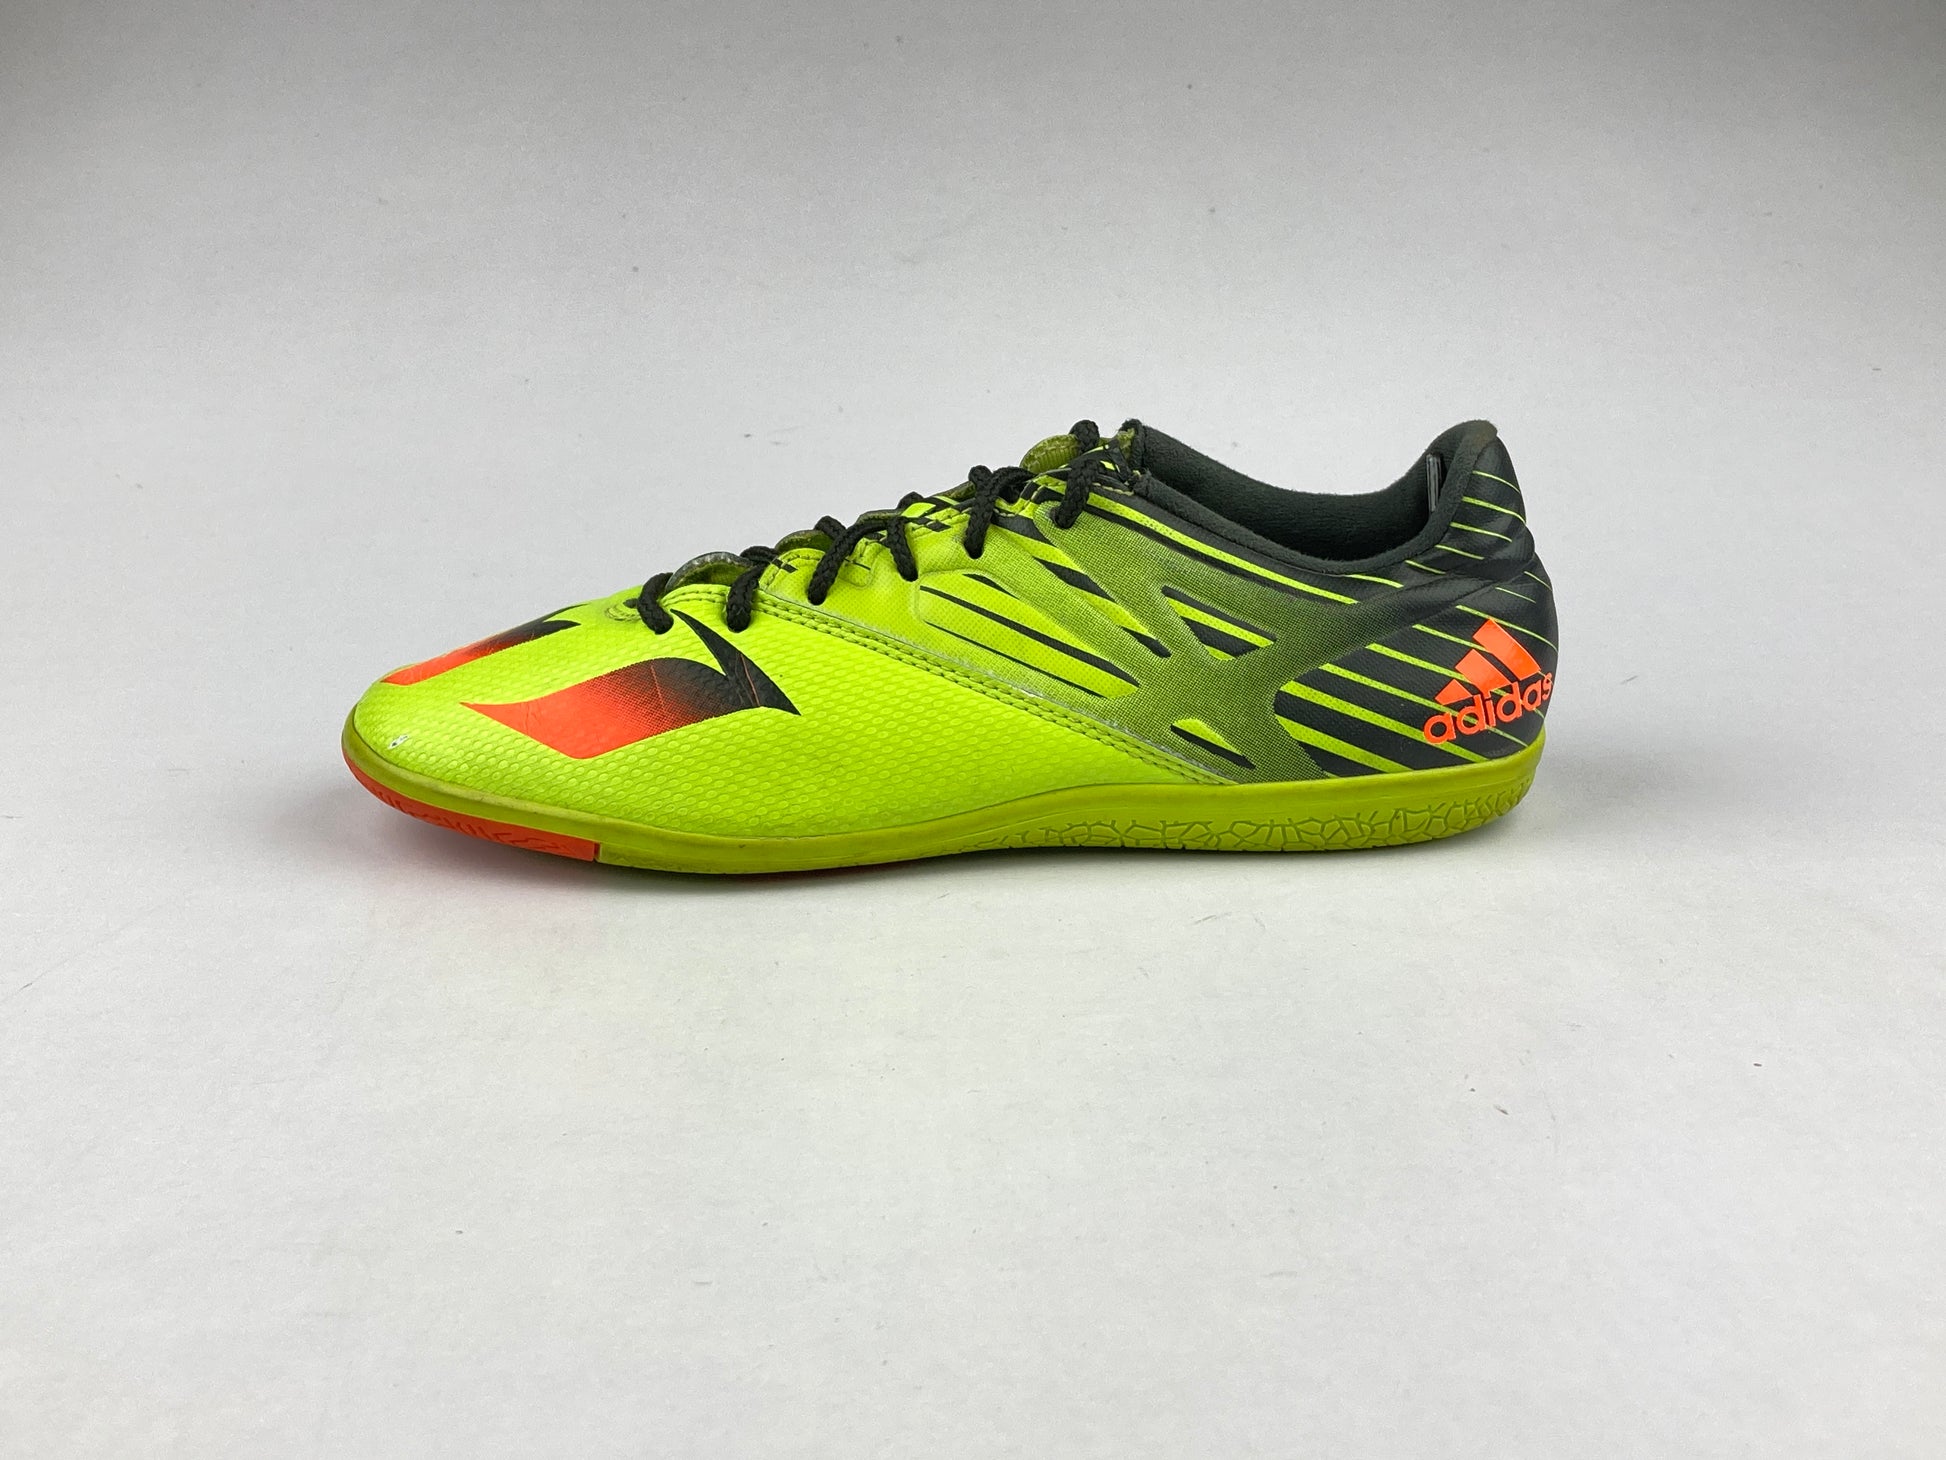 adidas Messi 15.3 IN 'Green/Black' s74691